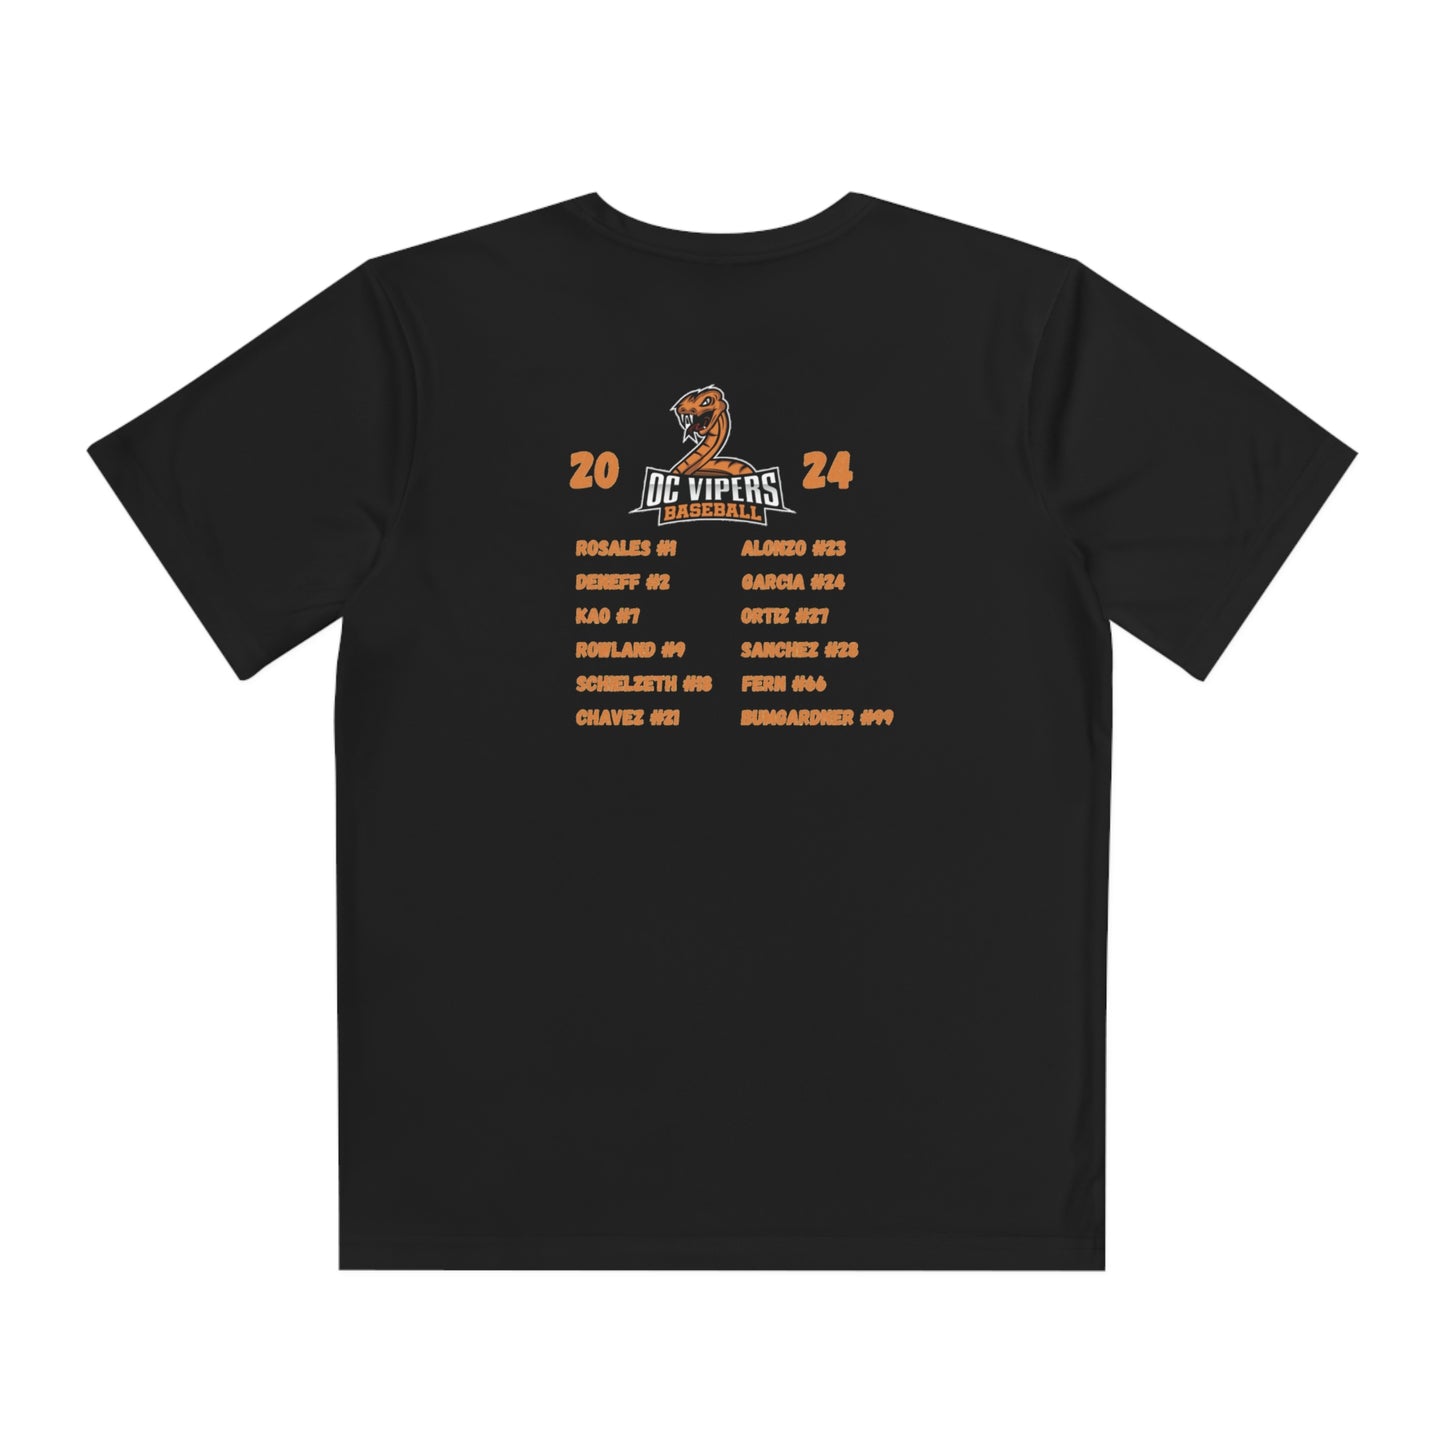 Youth Team Shirt Competitor Tee